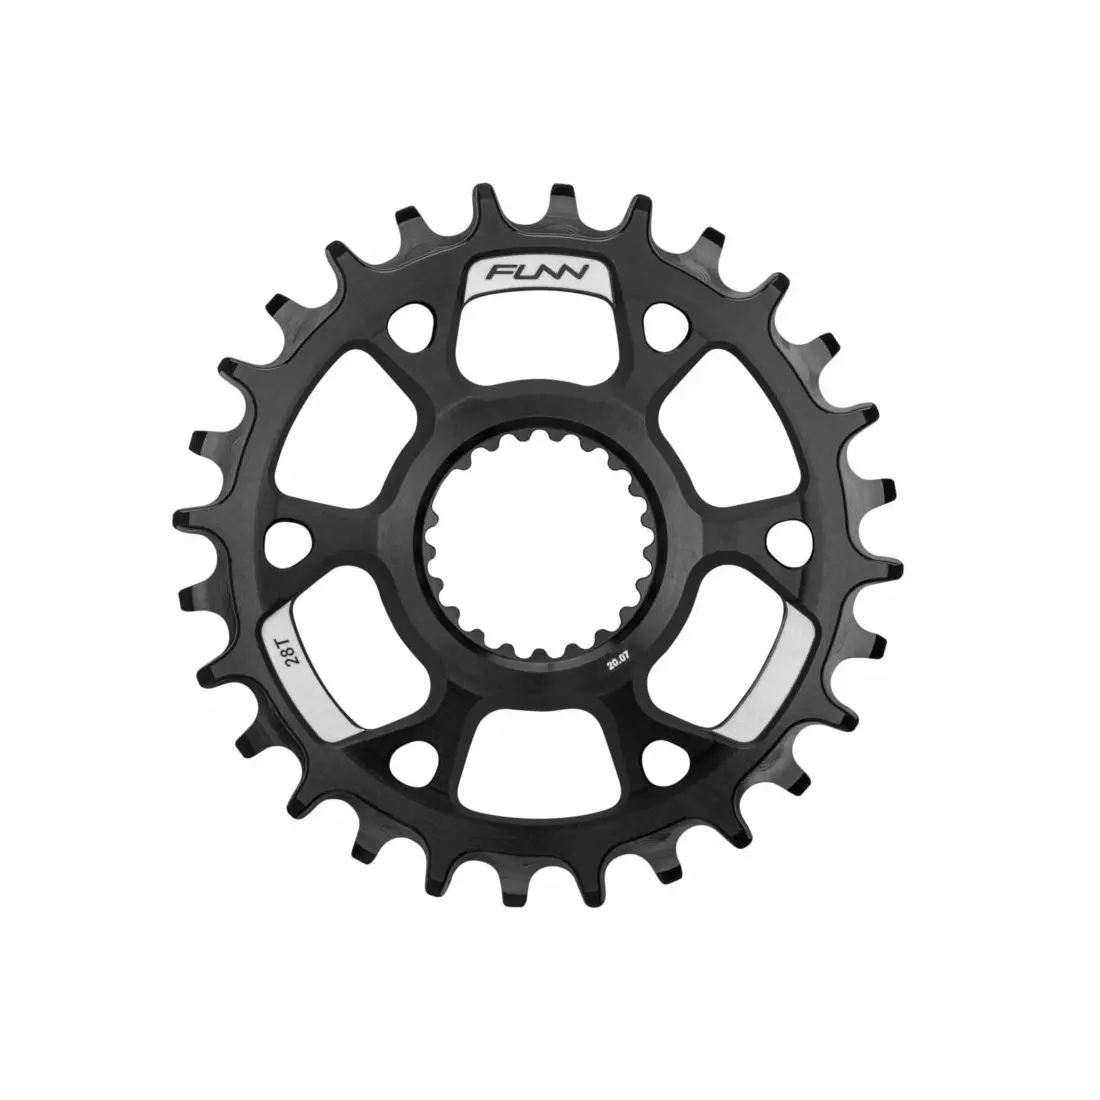 FUNN SOLO DS NARROW-WIDE 28T sprocket for bicycle crank czarna